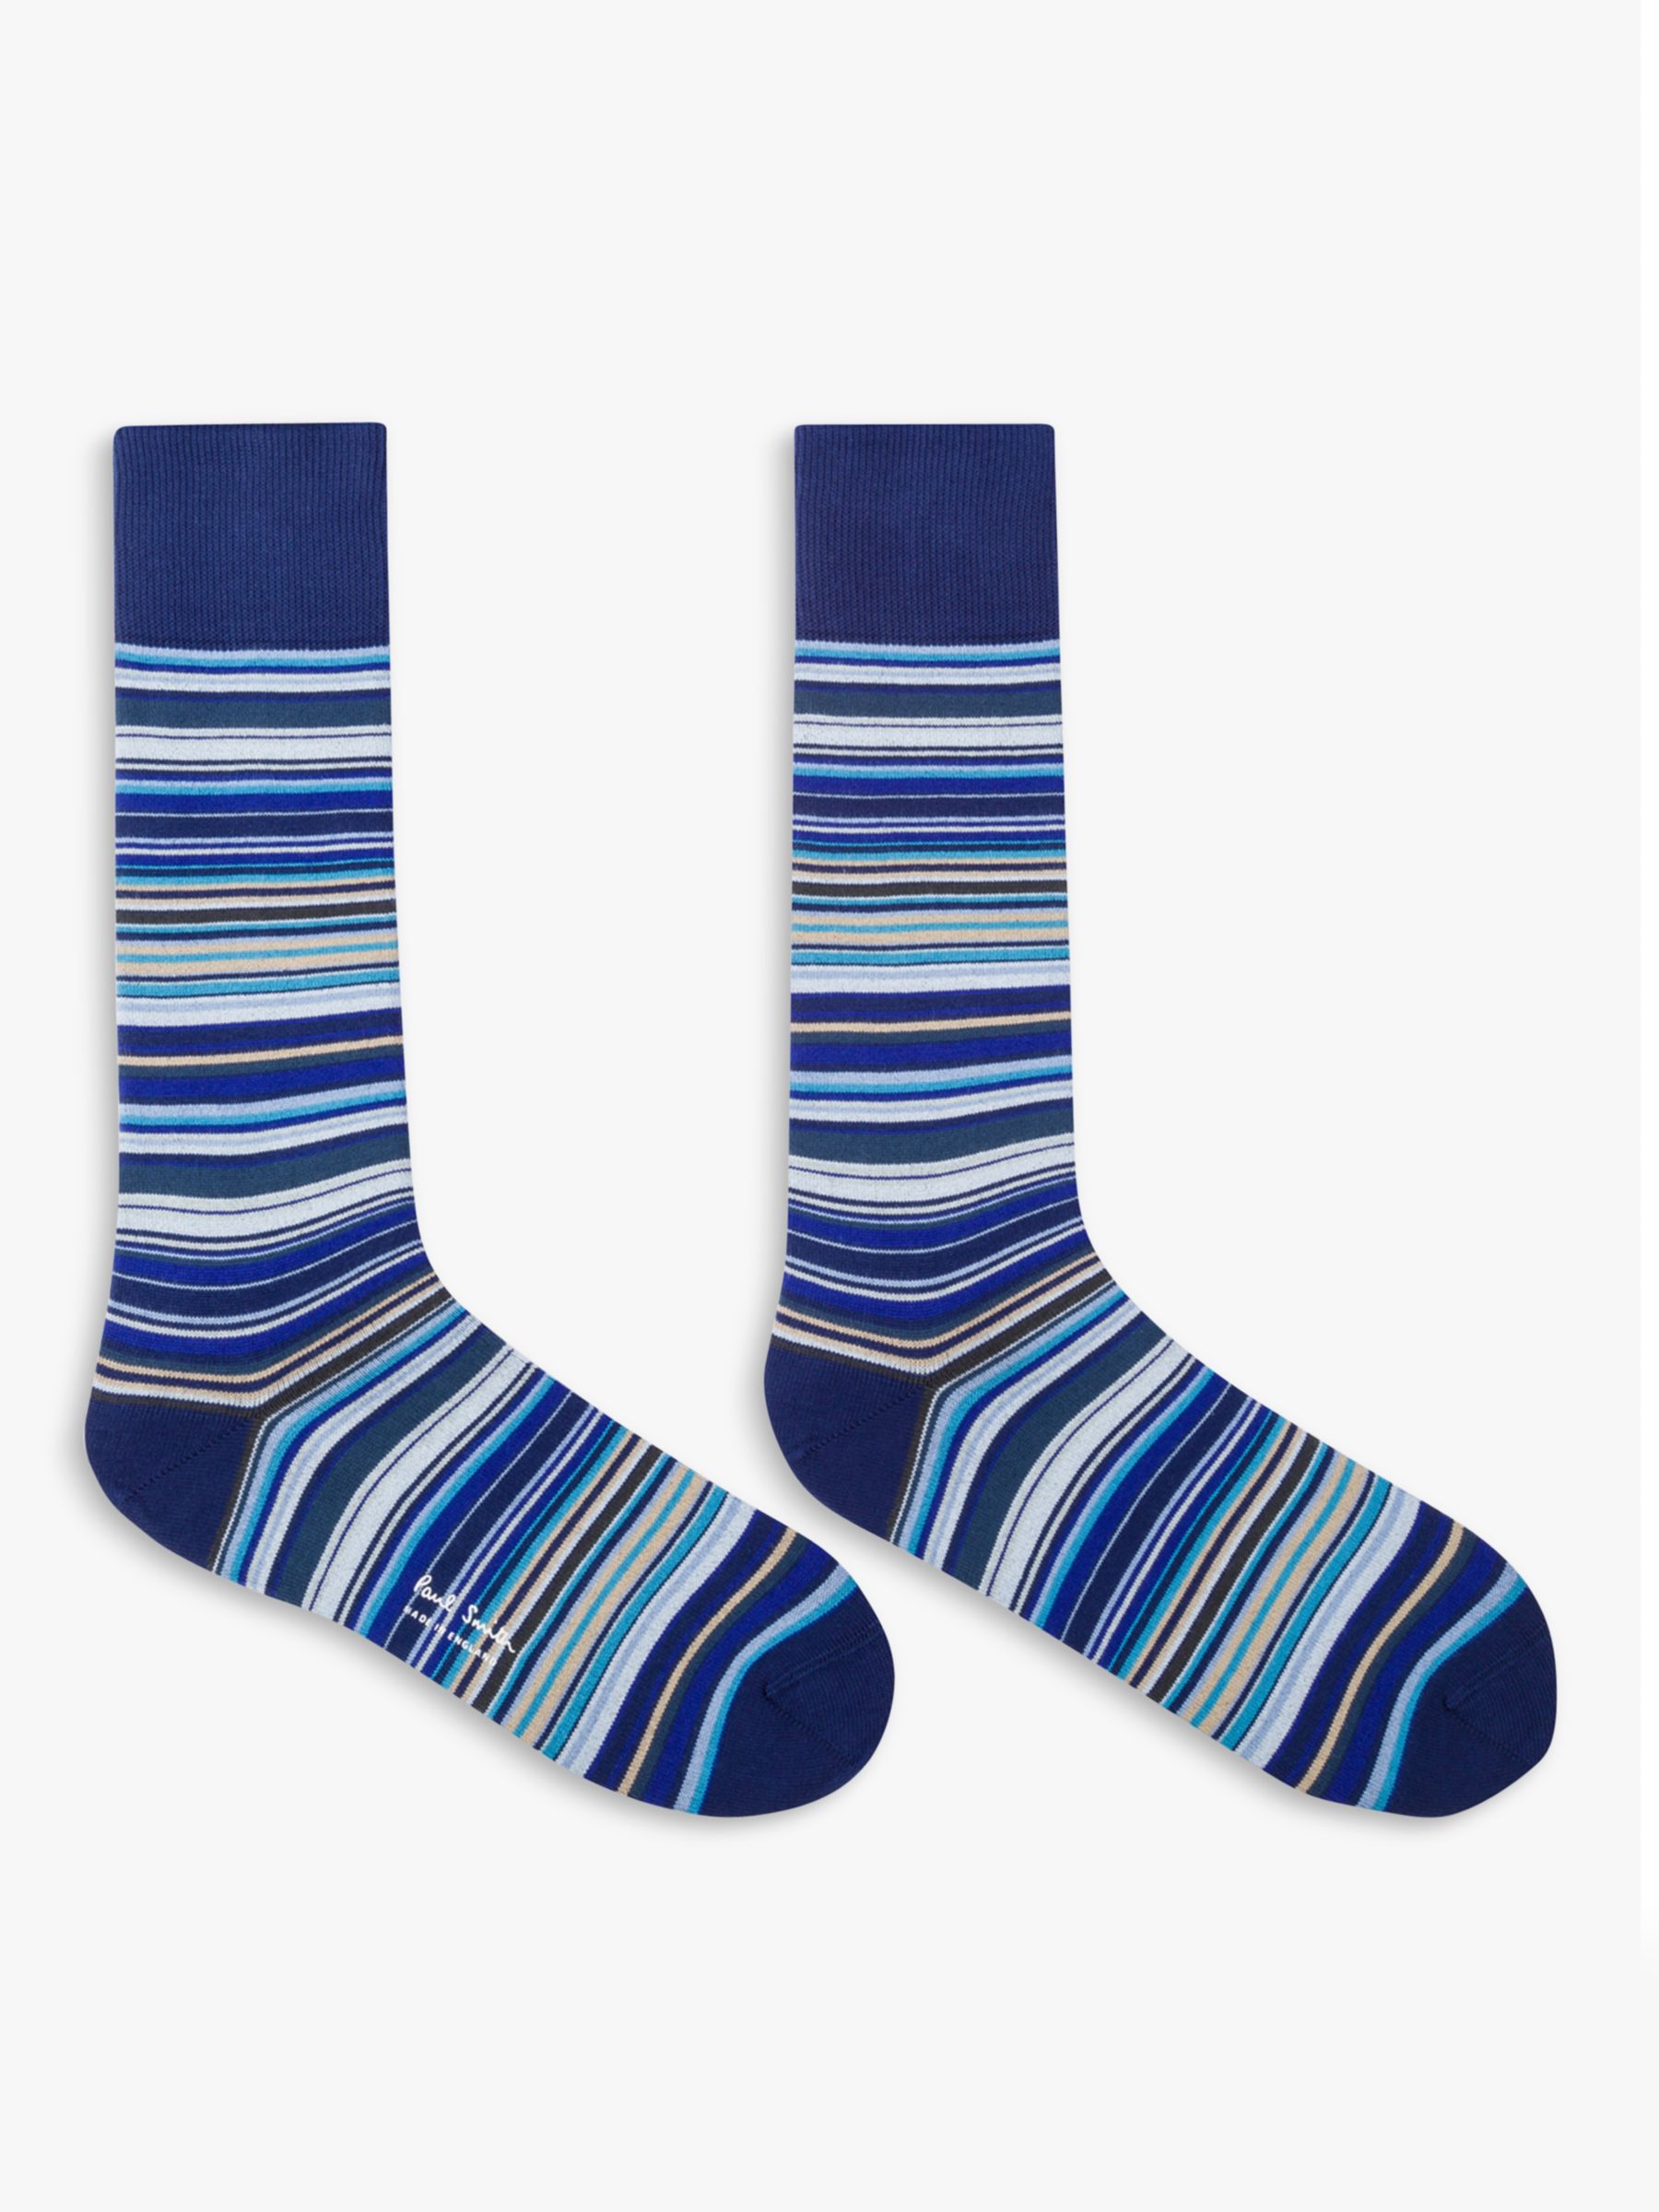 Buy Paul Smith Signature Stripe Socks, Pack of 3, One Size, Multi Online at johnlewis.com